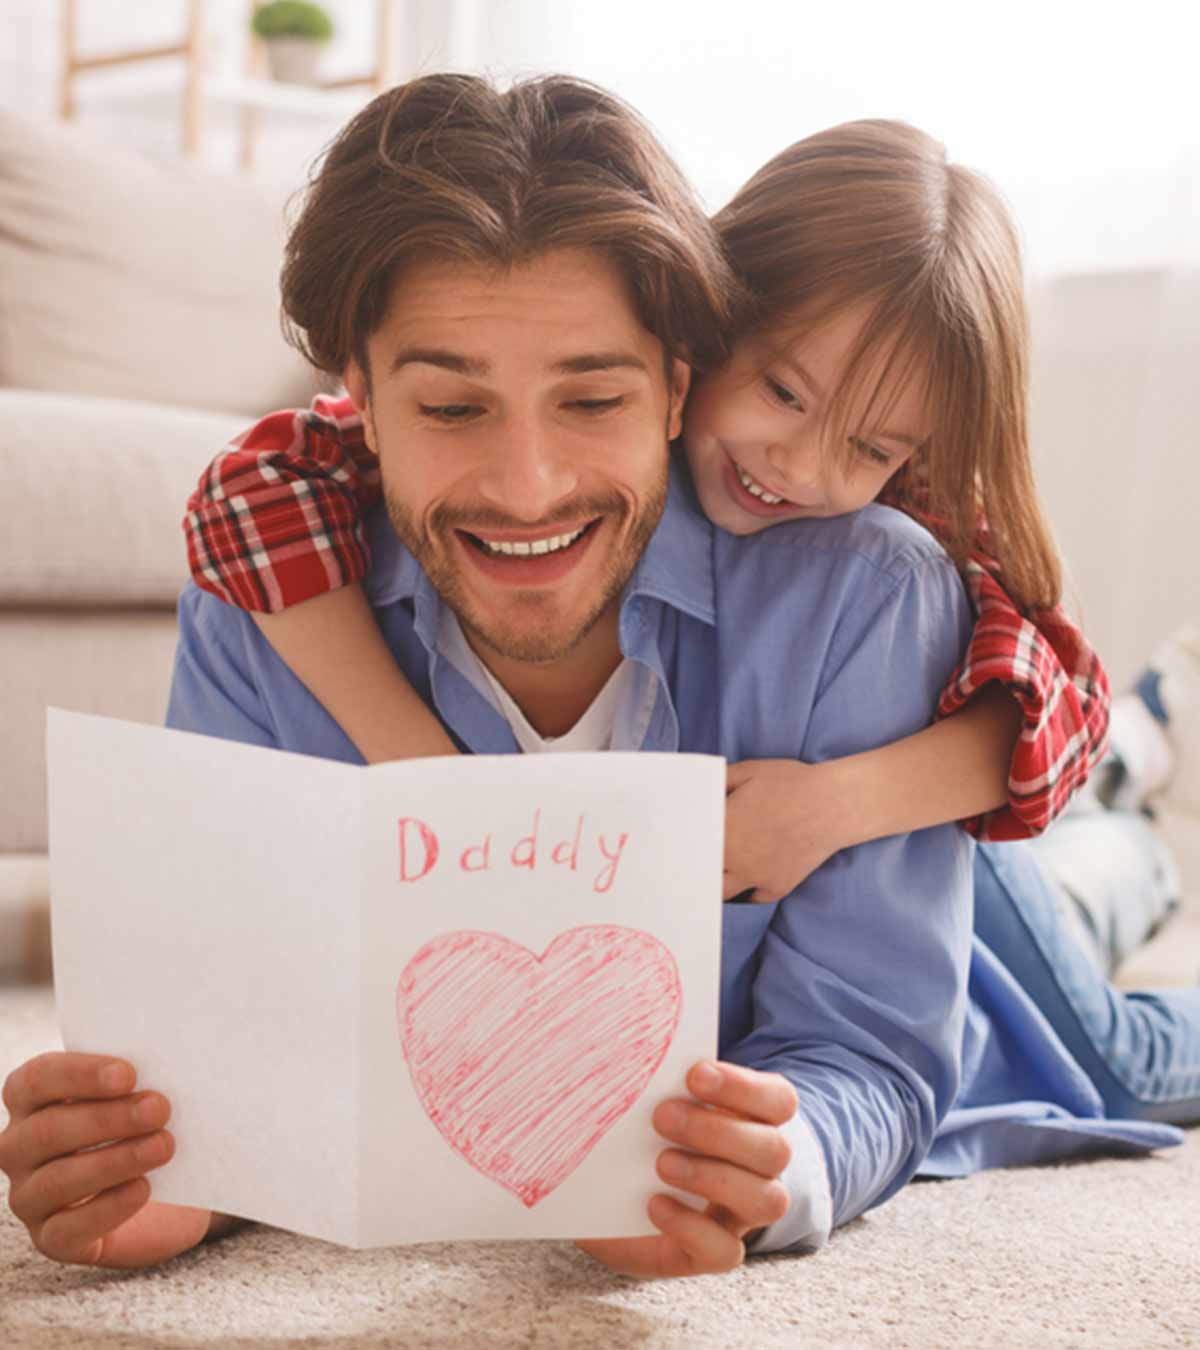 11+ Poems About Dad, Filled With Love And Gratitude